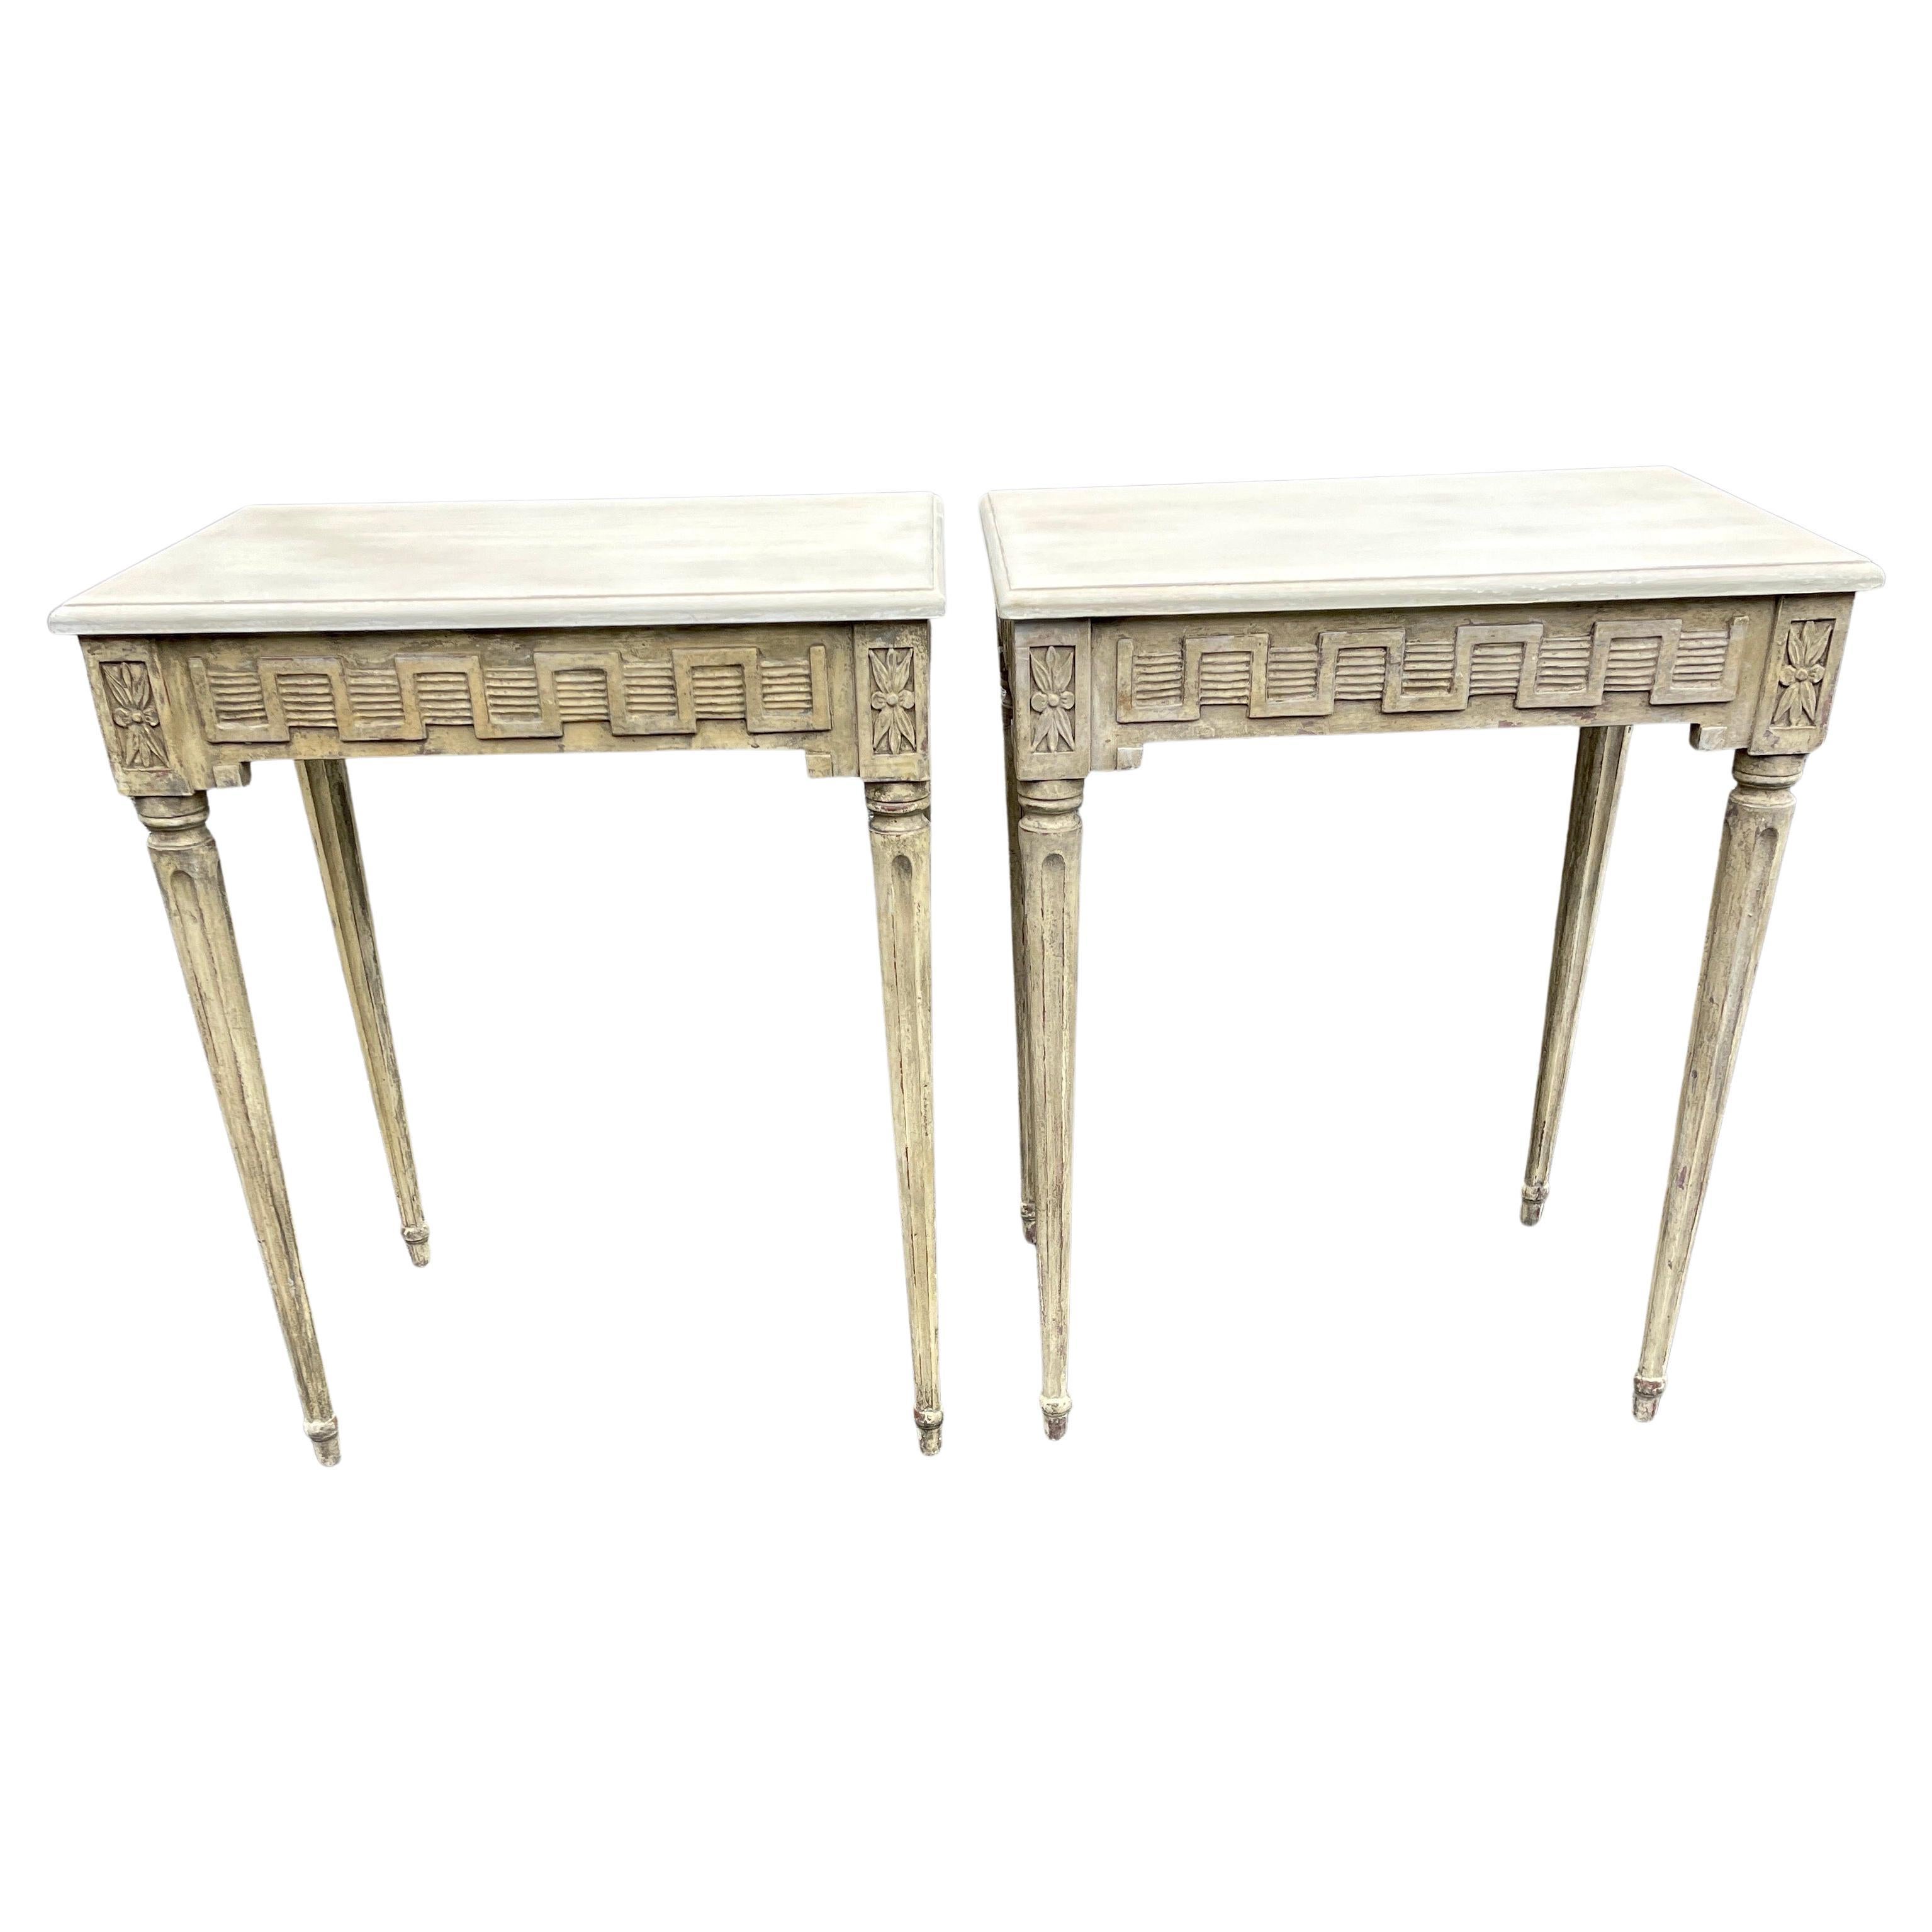 Pair of 19th Century Swedish Gustavian Painted Console Tables